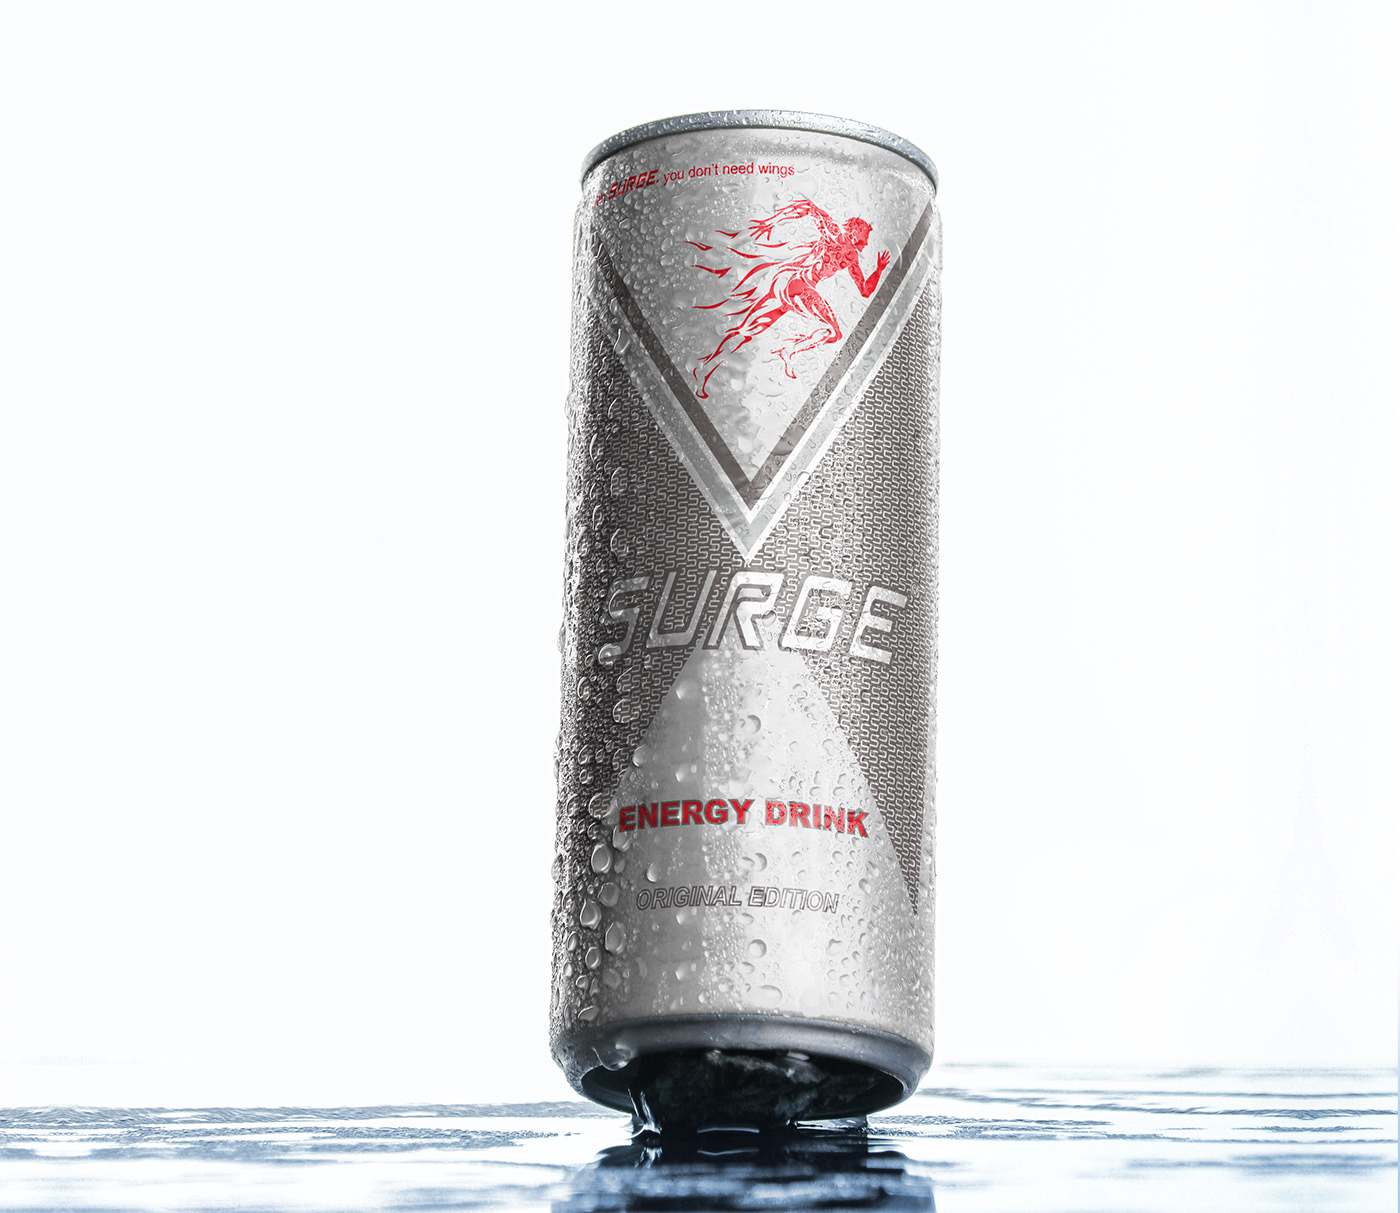 Surge energy drink can 